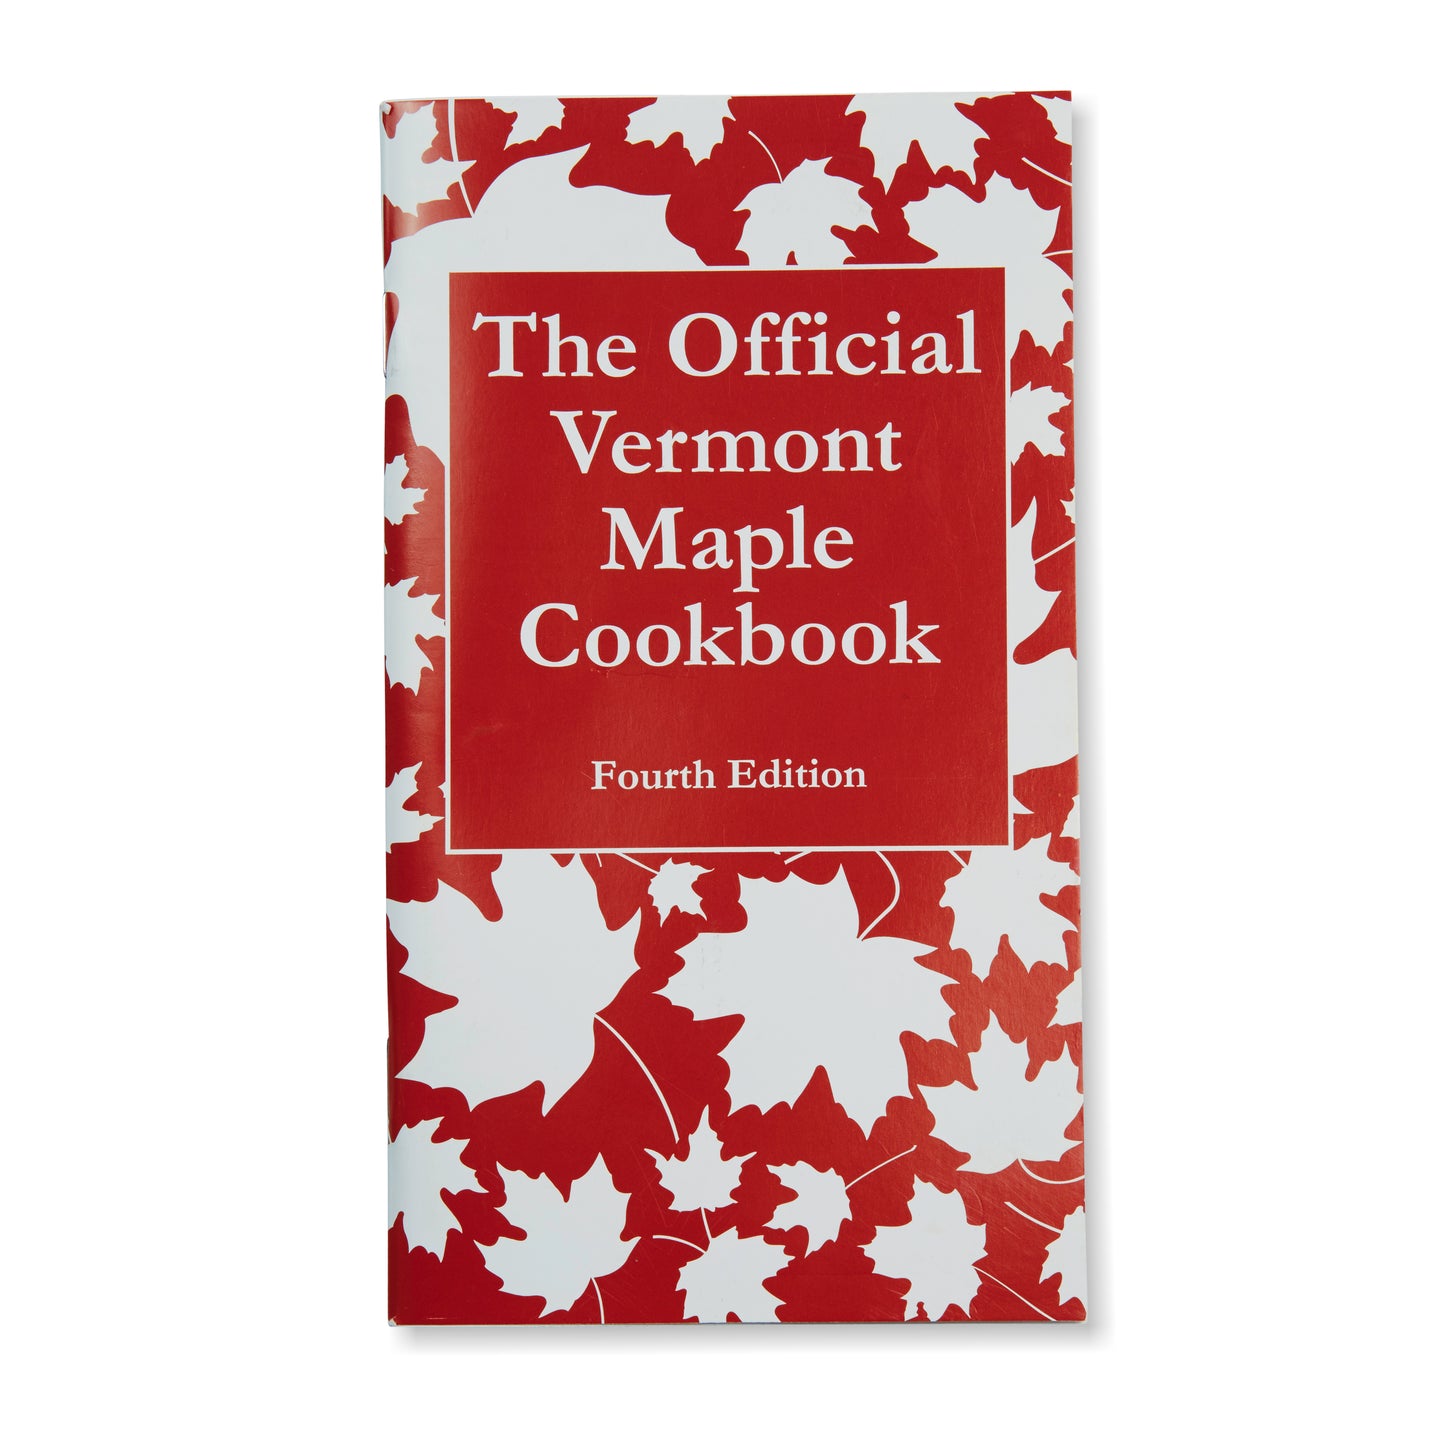 The Official Vermont Maple Cookbook Fourth Edition